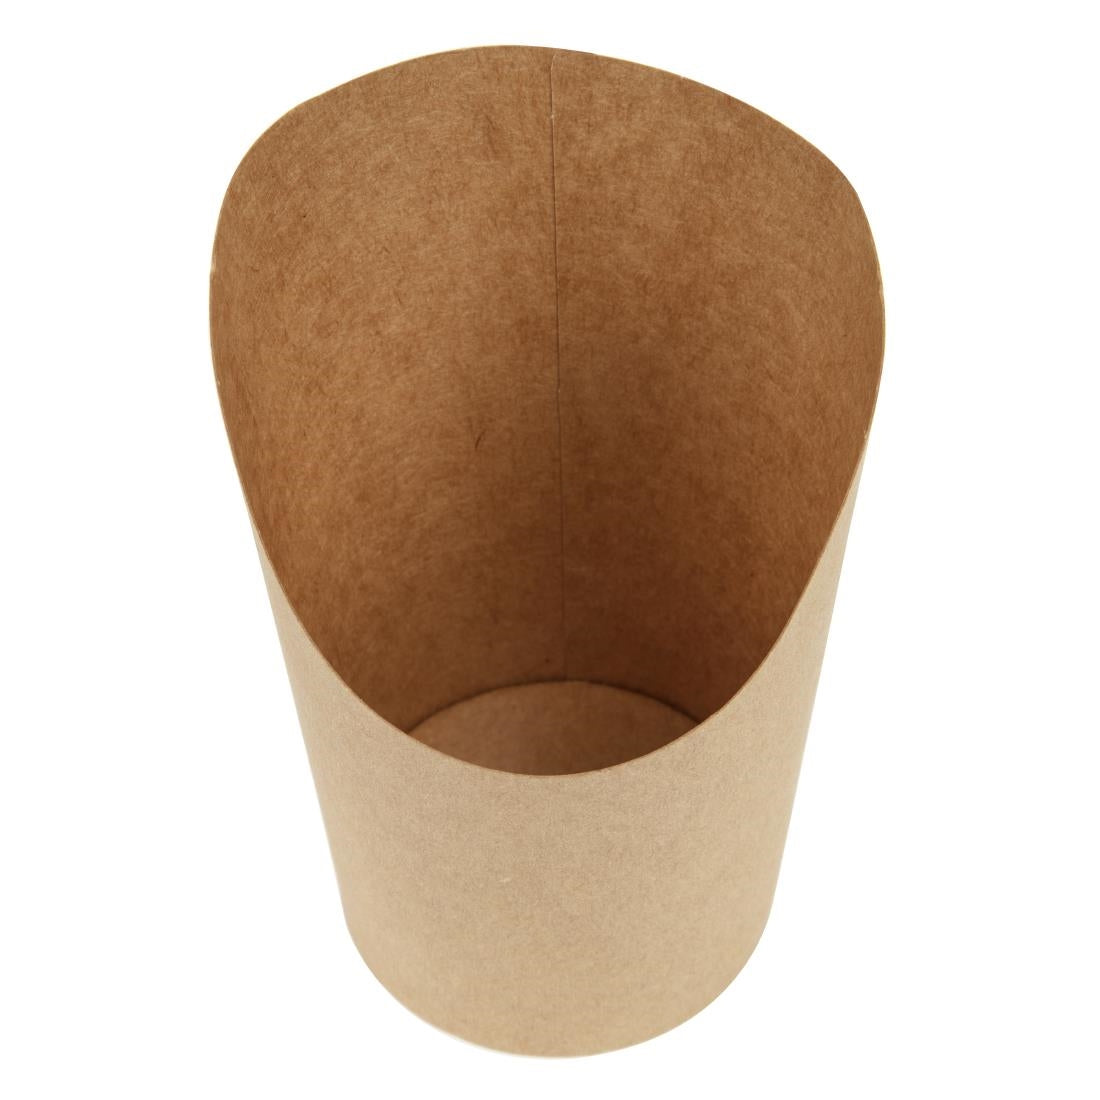 Colpac Recyclable Kraft Wrap Scoops (Pack of 1000) JD Catering Equipment Solutions Ltd